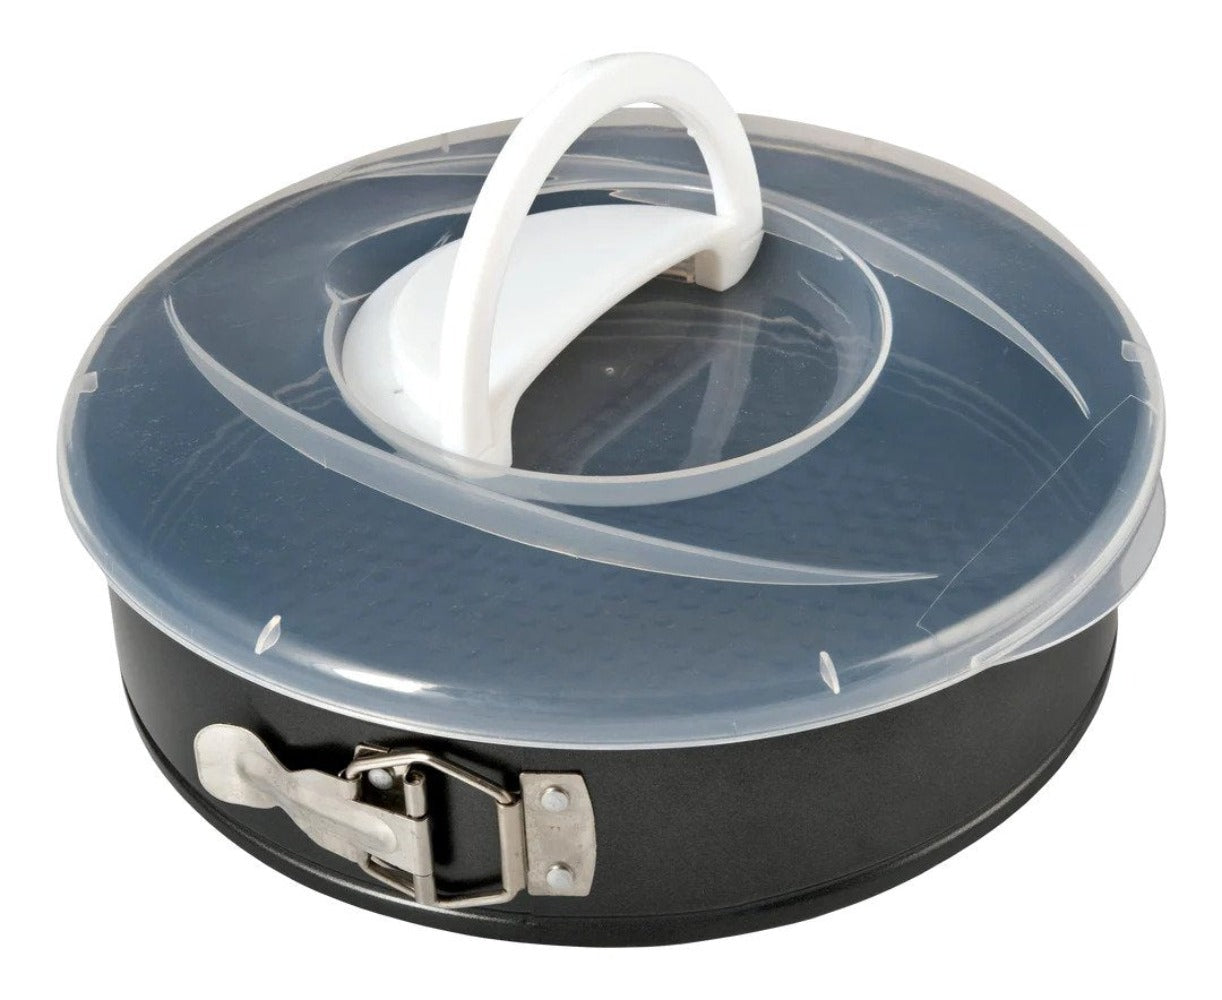 10-Inch Springform Pan with Lid